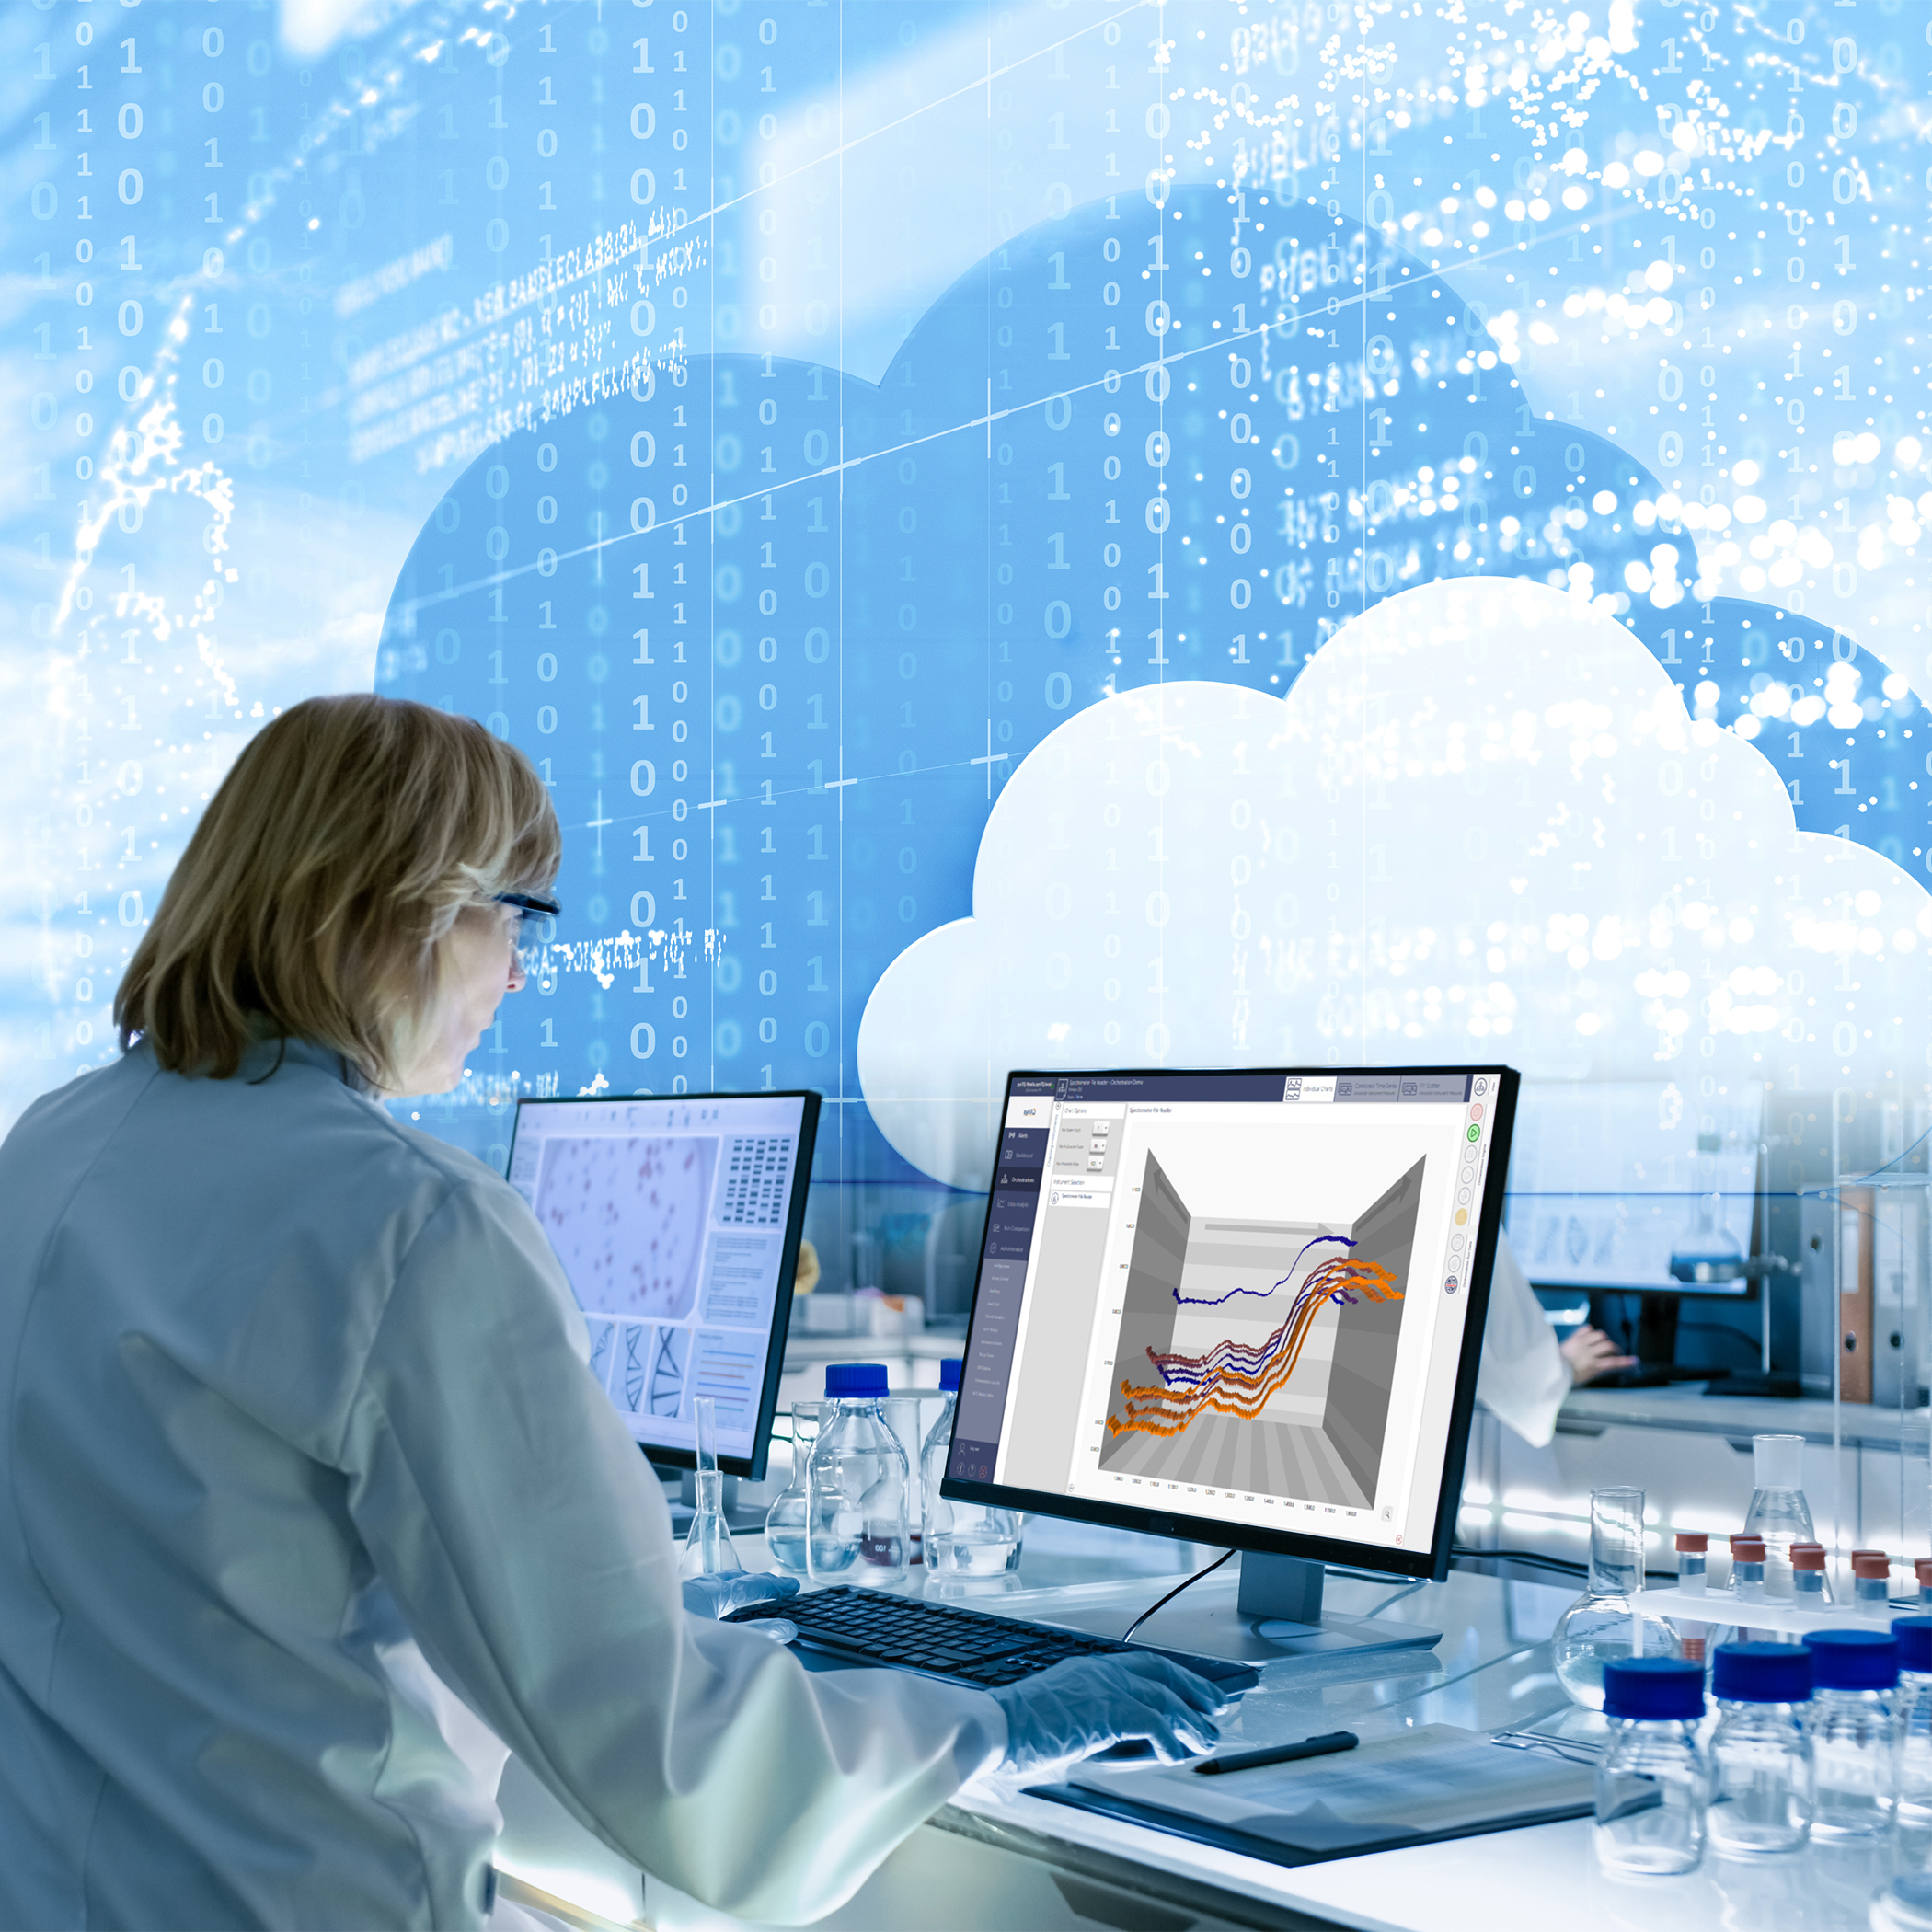 By incorporating Cloud computing within PAT frameworks, manufacturers can boost process control and quality assurance while streamlining regulatory compliance activities.